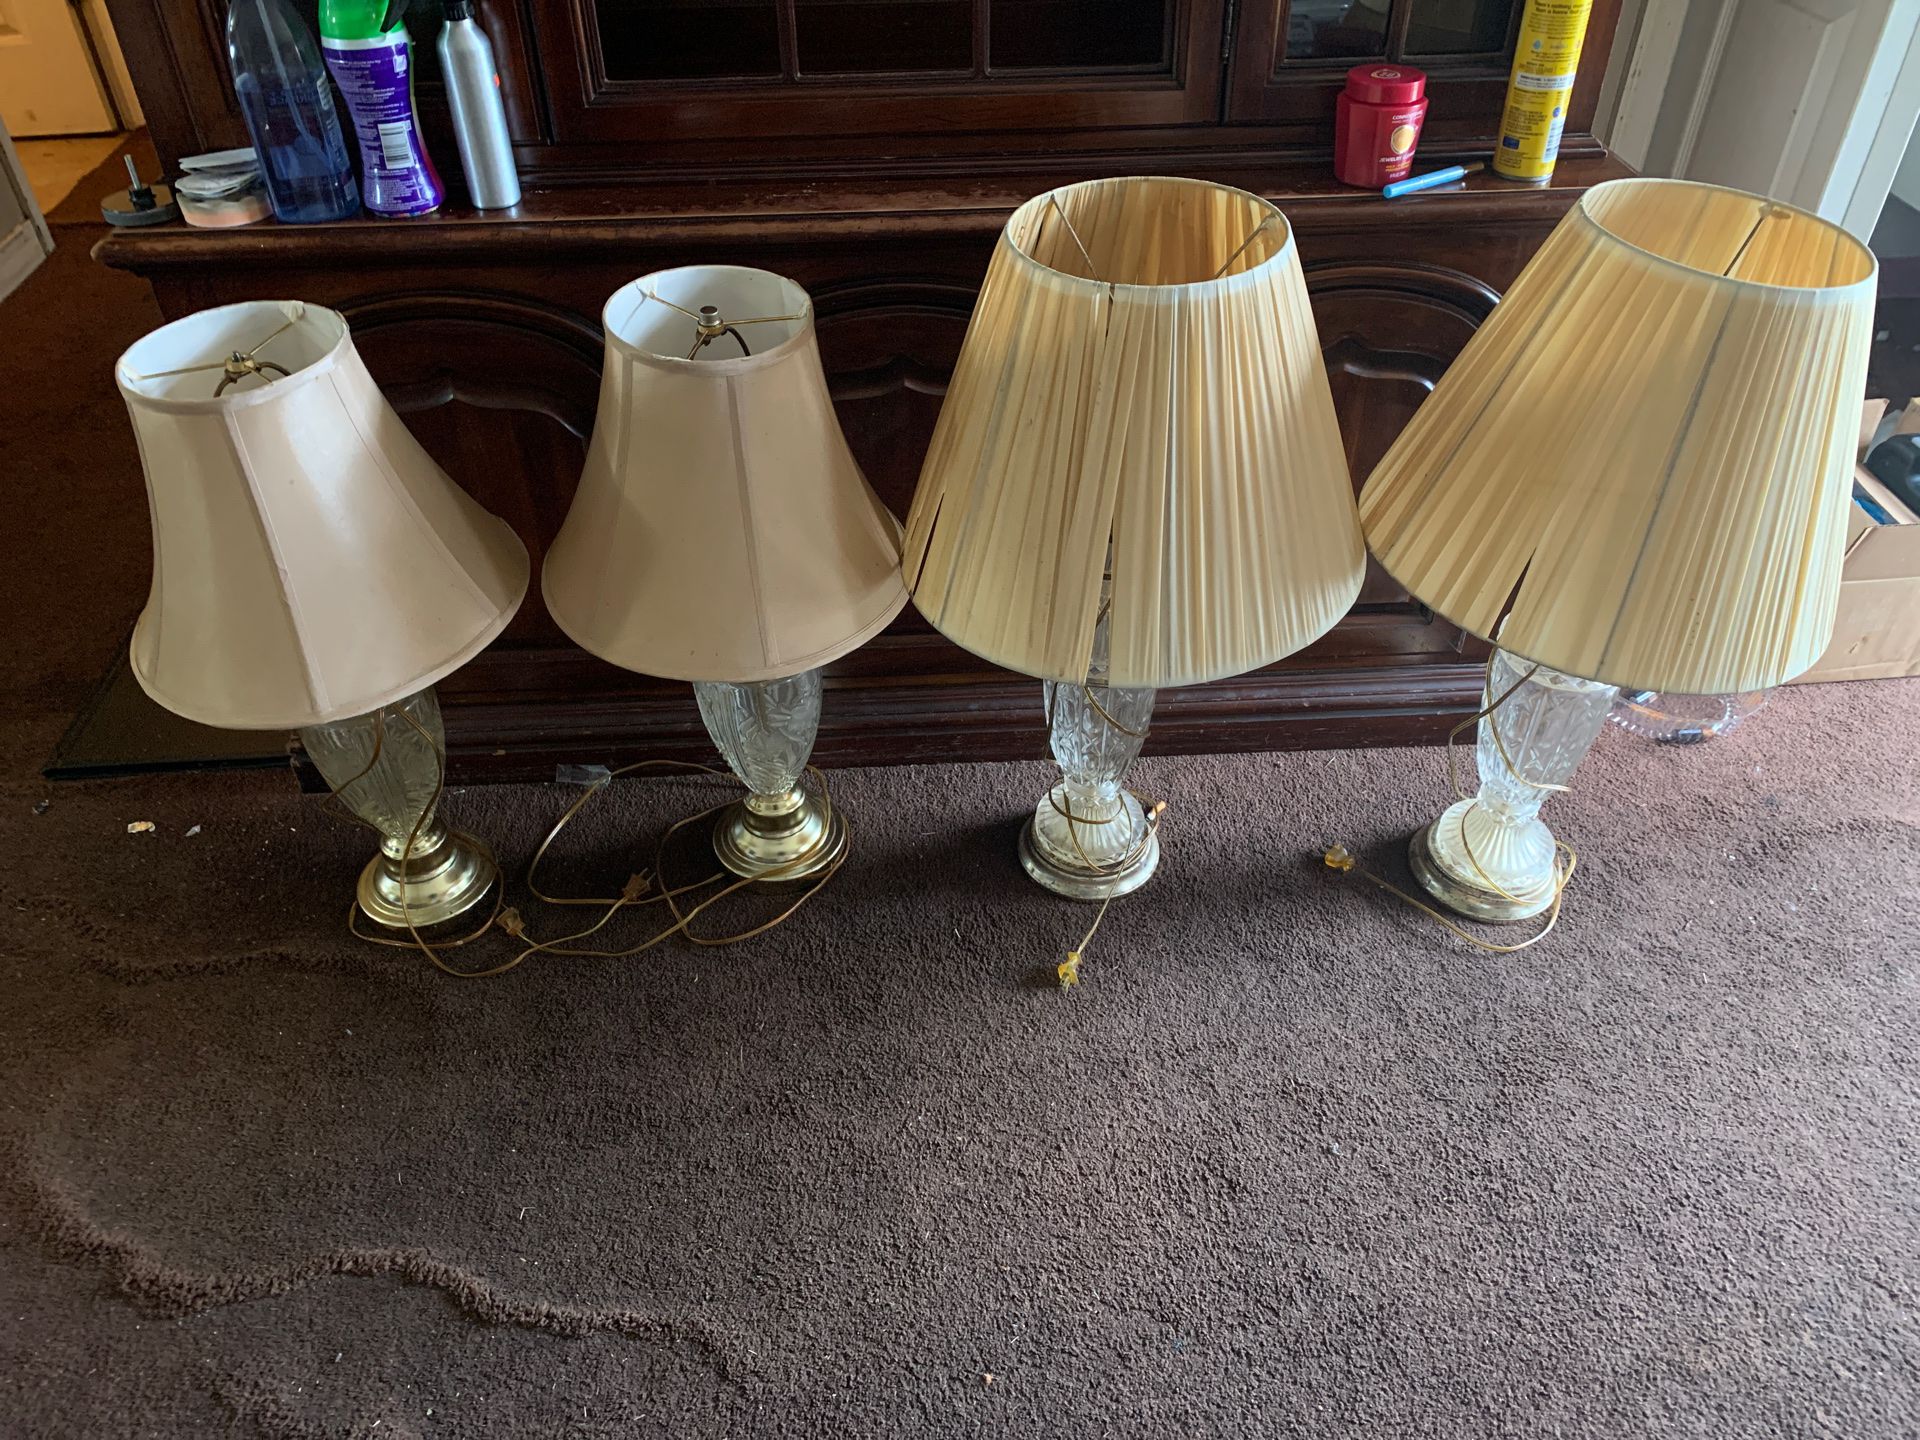 4 Lamps for Sale.